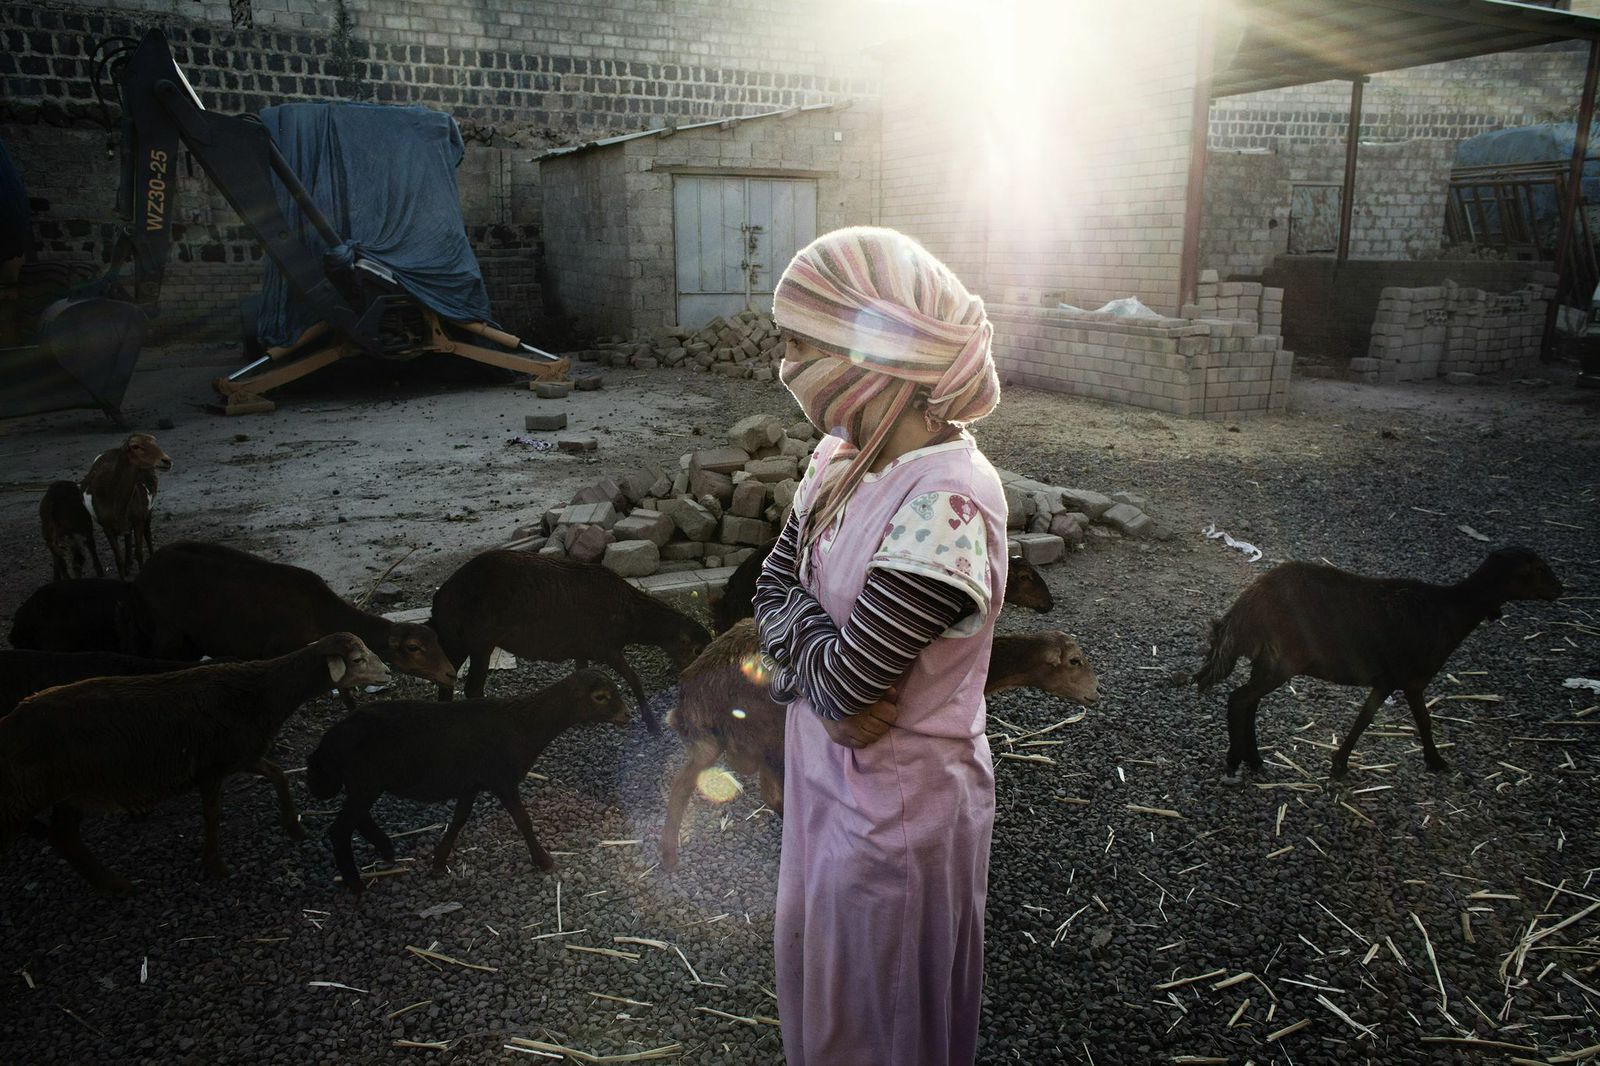 Hanan looks after a herd of sheep in the backyard of her house in Sanaa, Dec. 2012. She is in her first year studying law at university. She’s the only female student among twenty-two male classmates. Her parents supported her education despite opposition from some relatives.